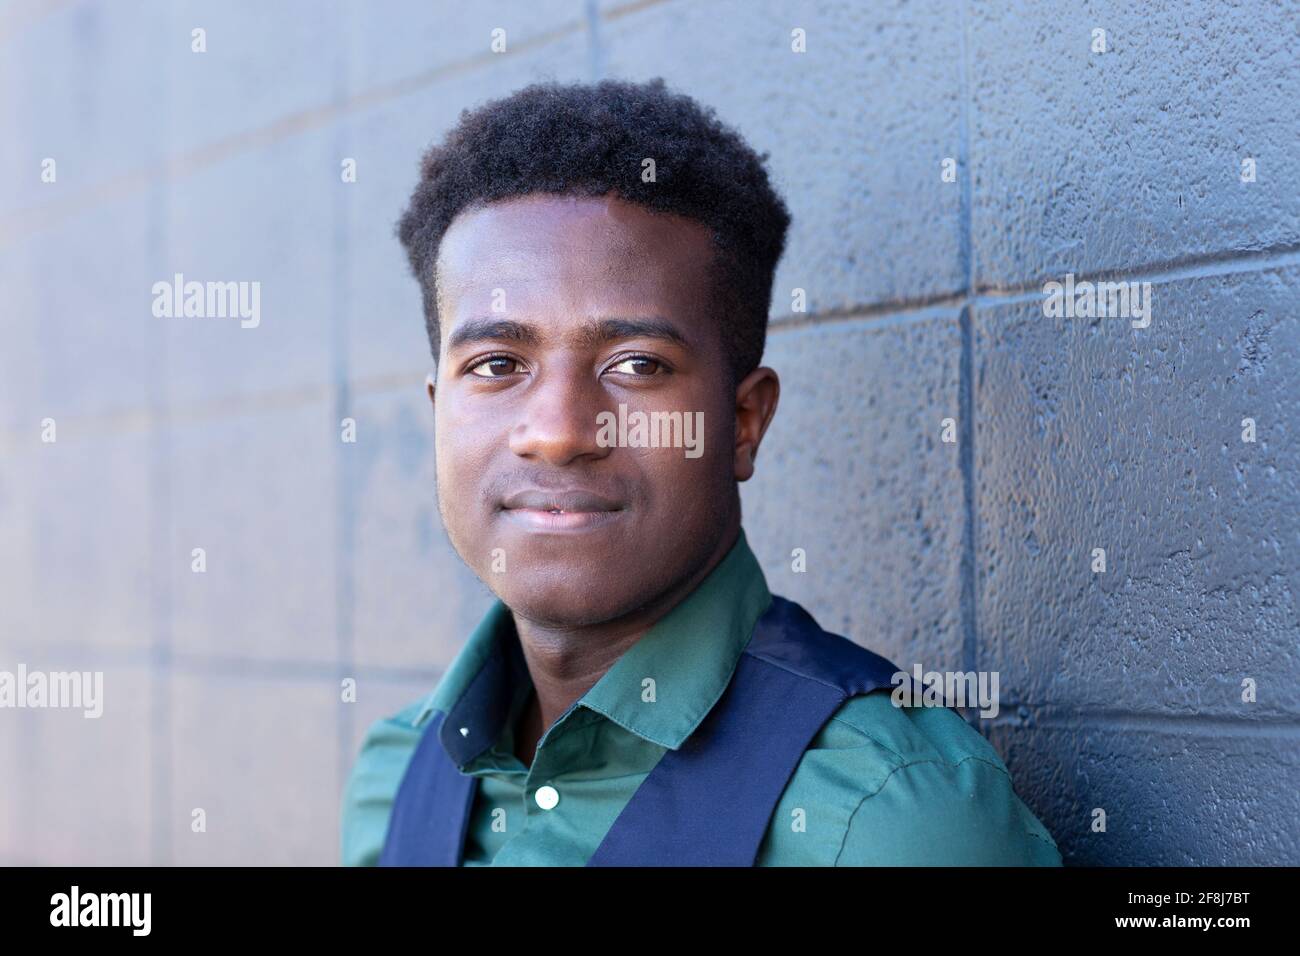 A handsome young black man leans against a gray concrete block wall Stock Photo